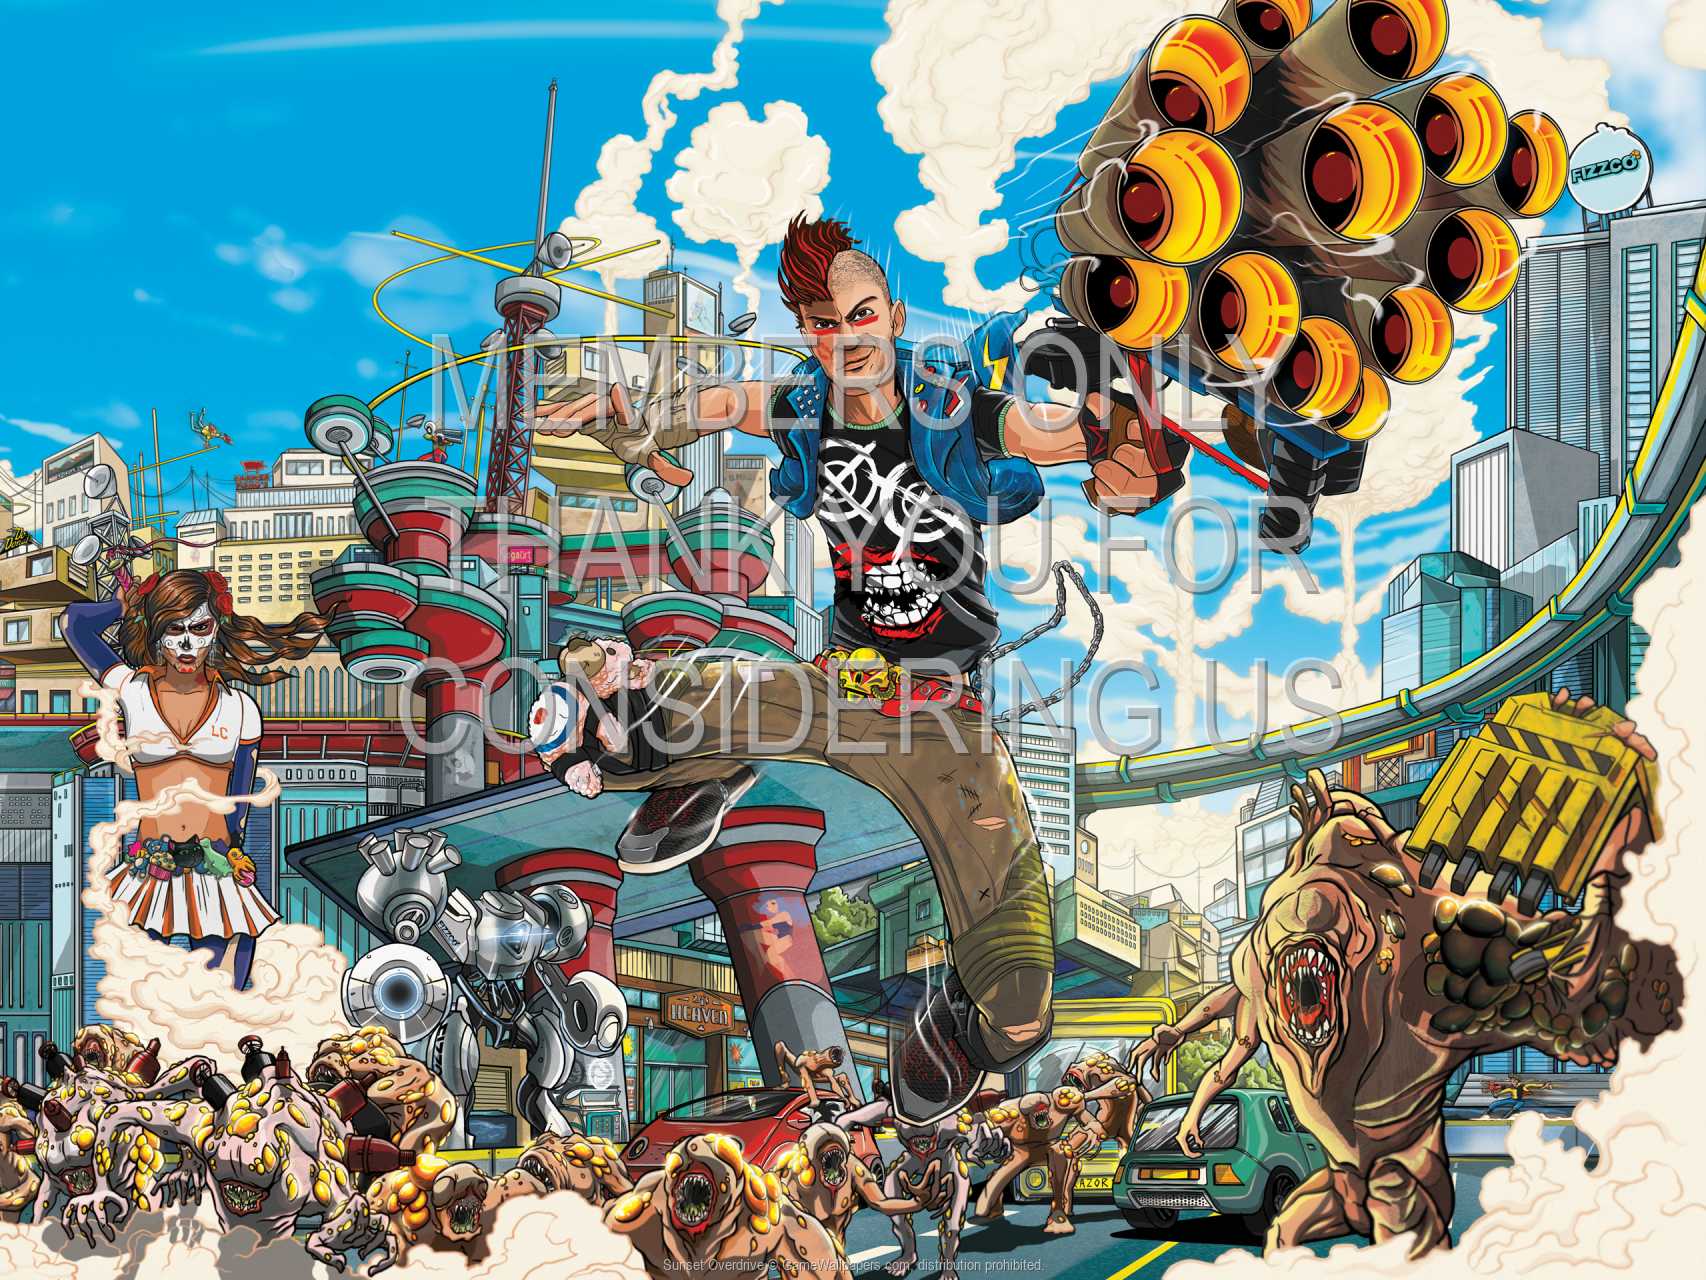 Sunset Overdrive 720p Horizontal Mobile wallpaper or background 01